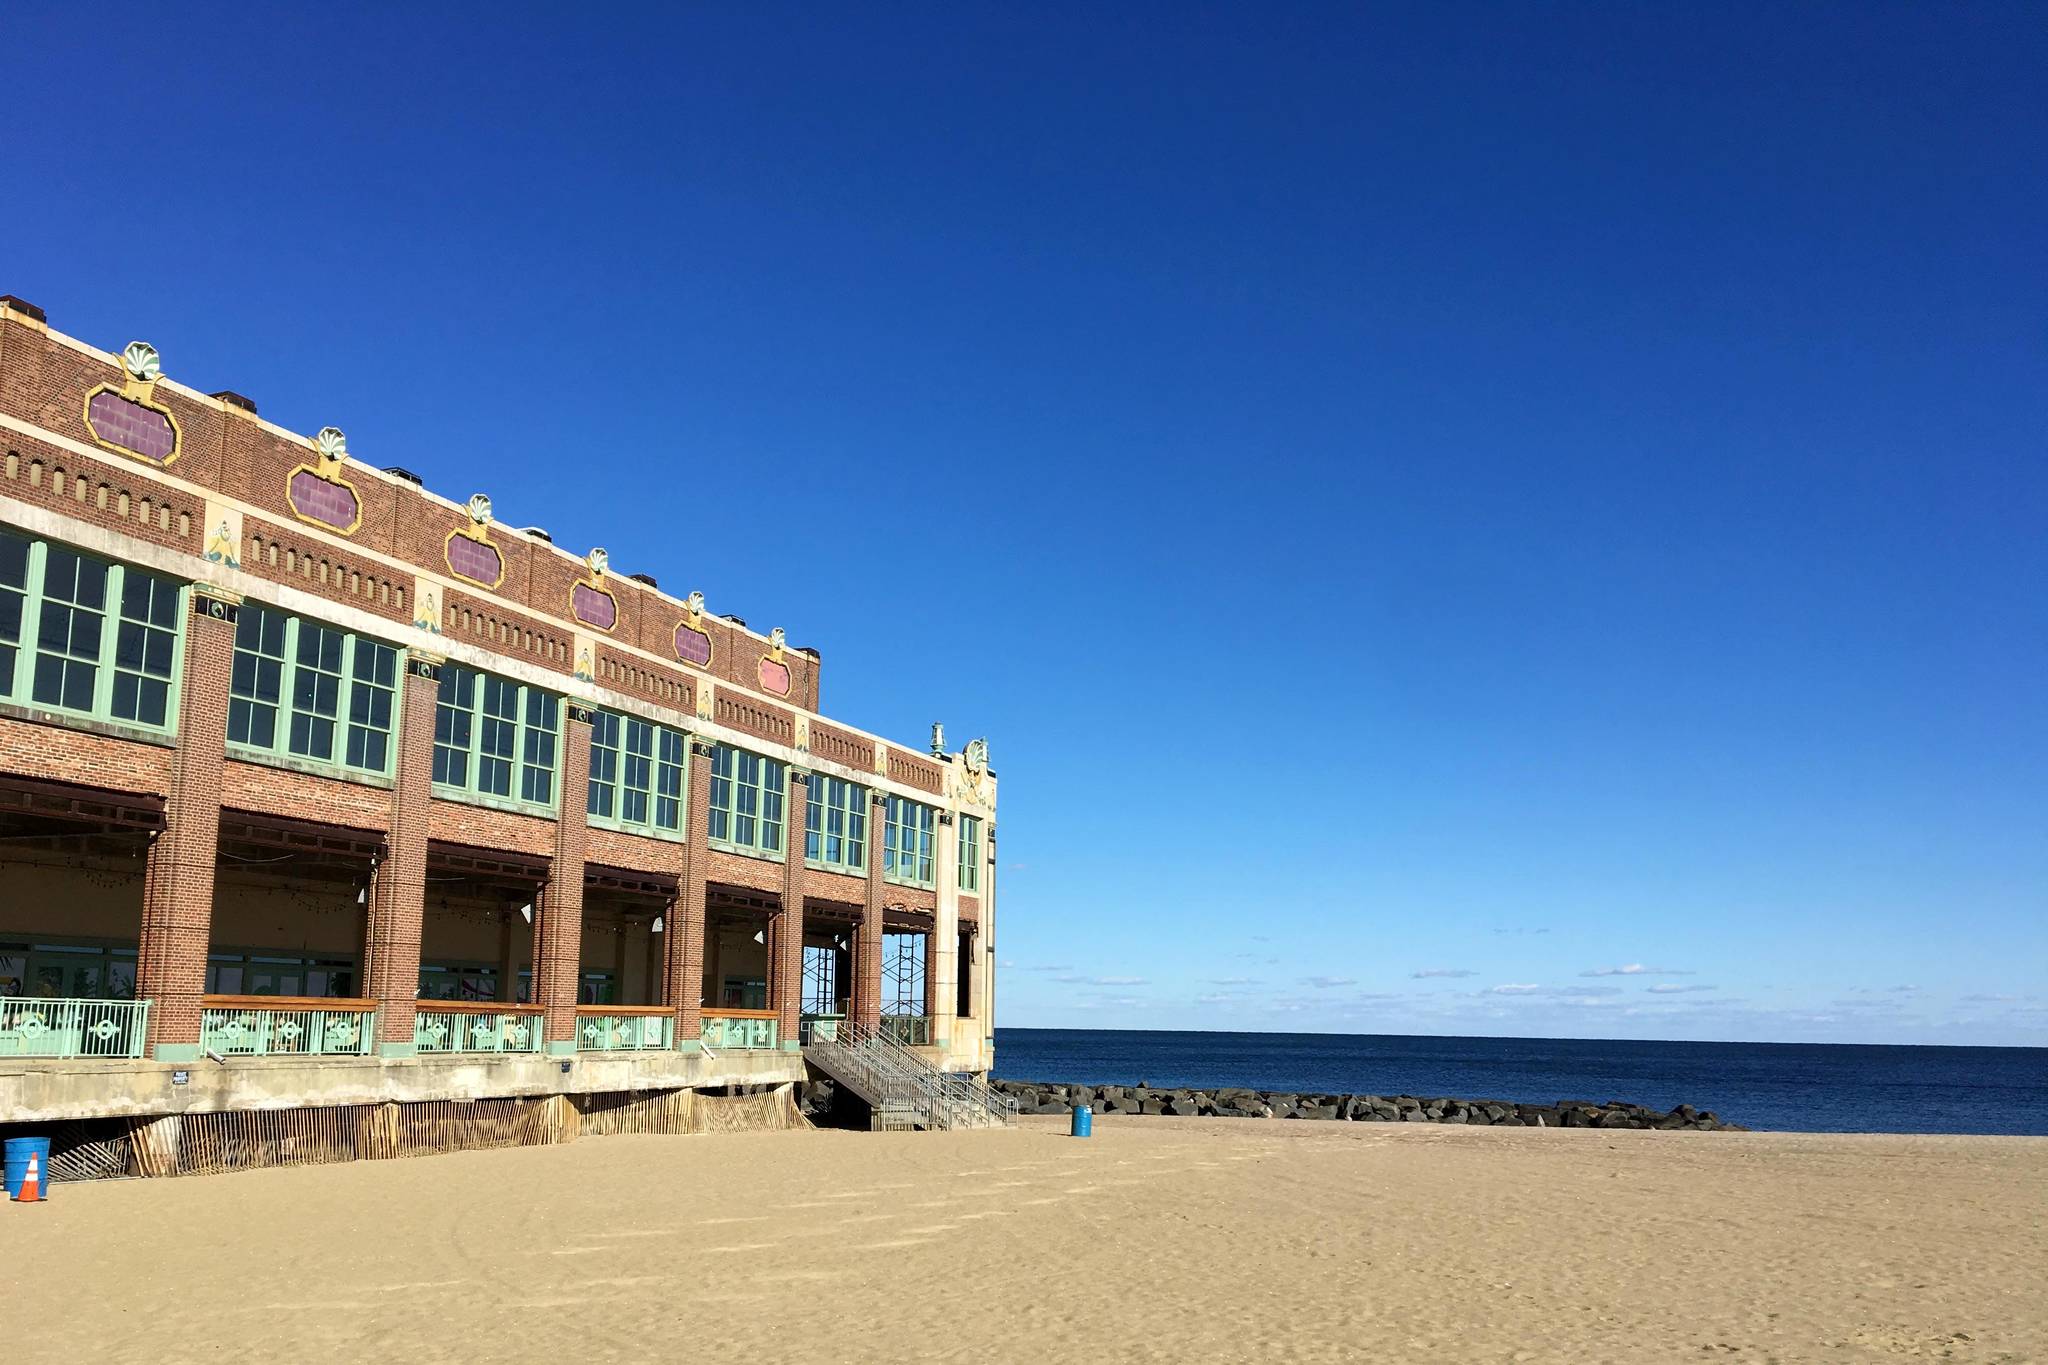 The Asbury Park Convention Hall is seen here during a run taken by the author on Thursday, Oct. 18. In 1933, the cruise liner S.S. Morro Castle narrowly missed the convention center when the flaming ship beached on the coast of Asbury Park. (Photo by Kat Sorensen/Peninsula Clarion)